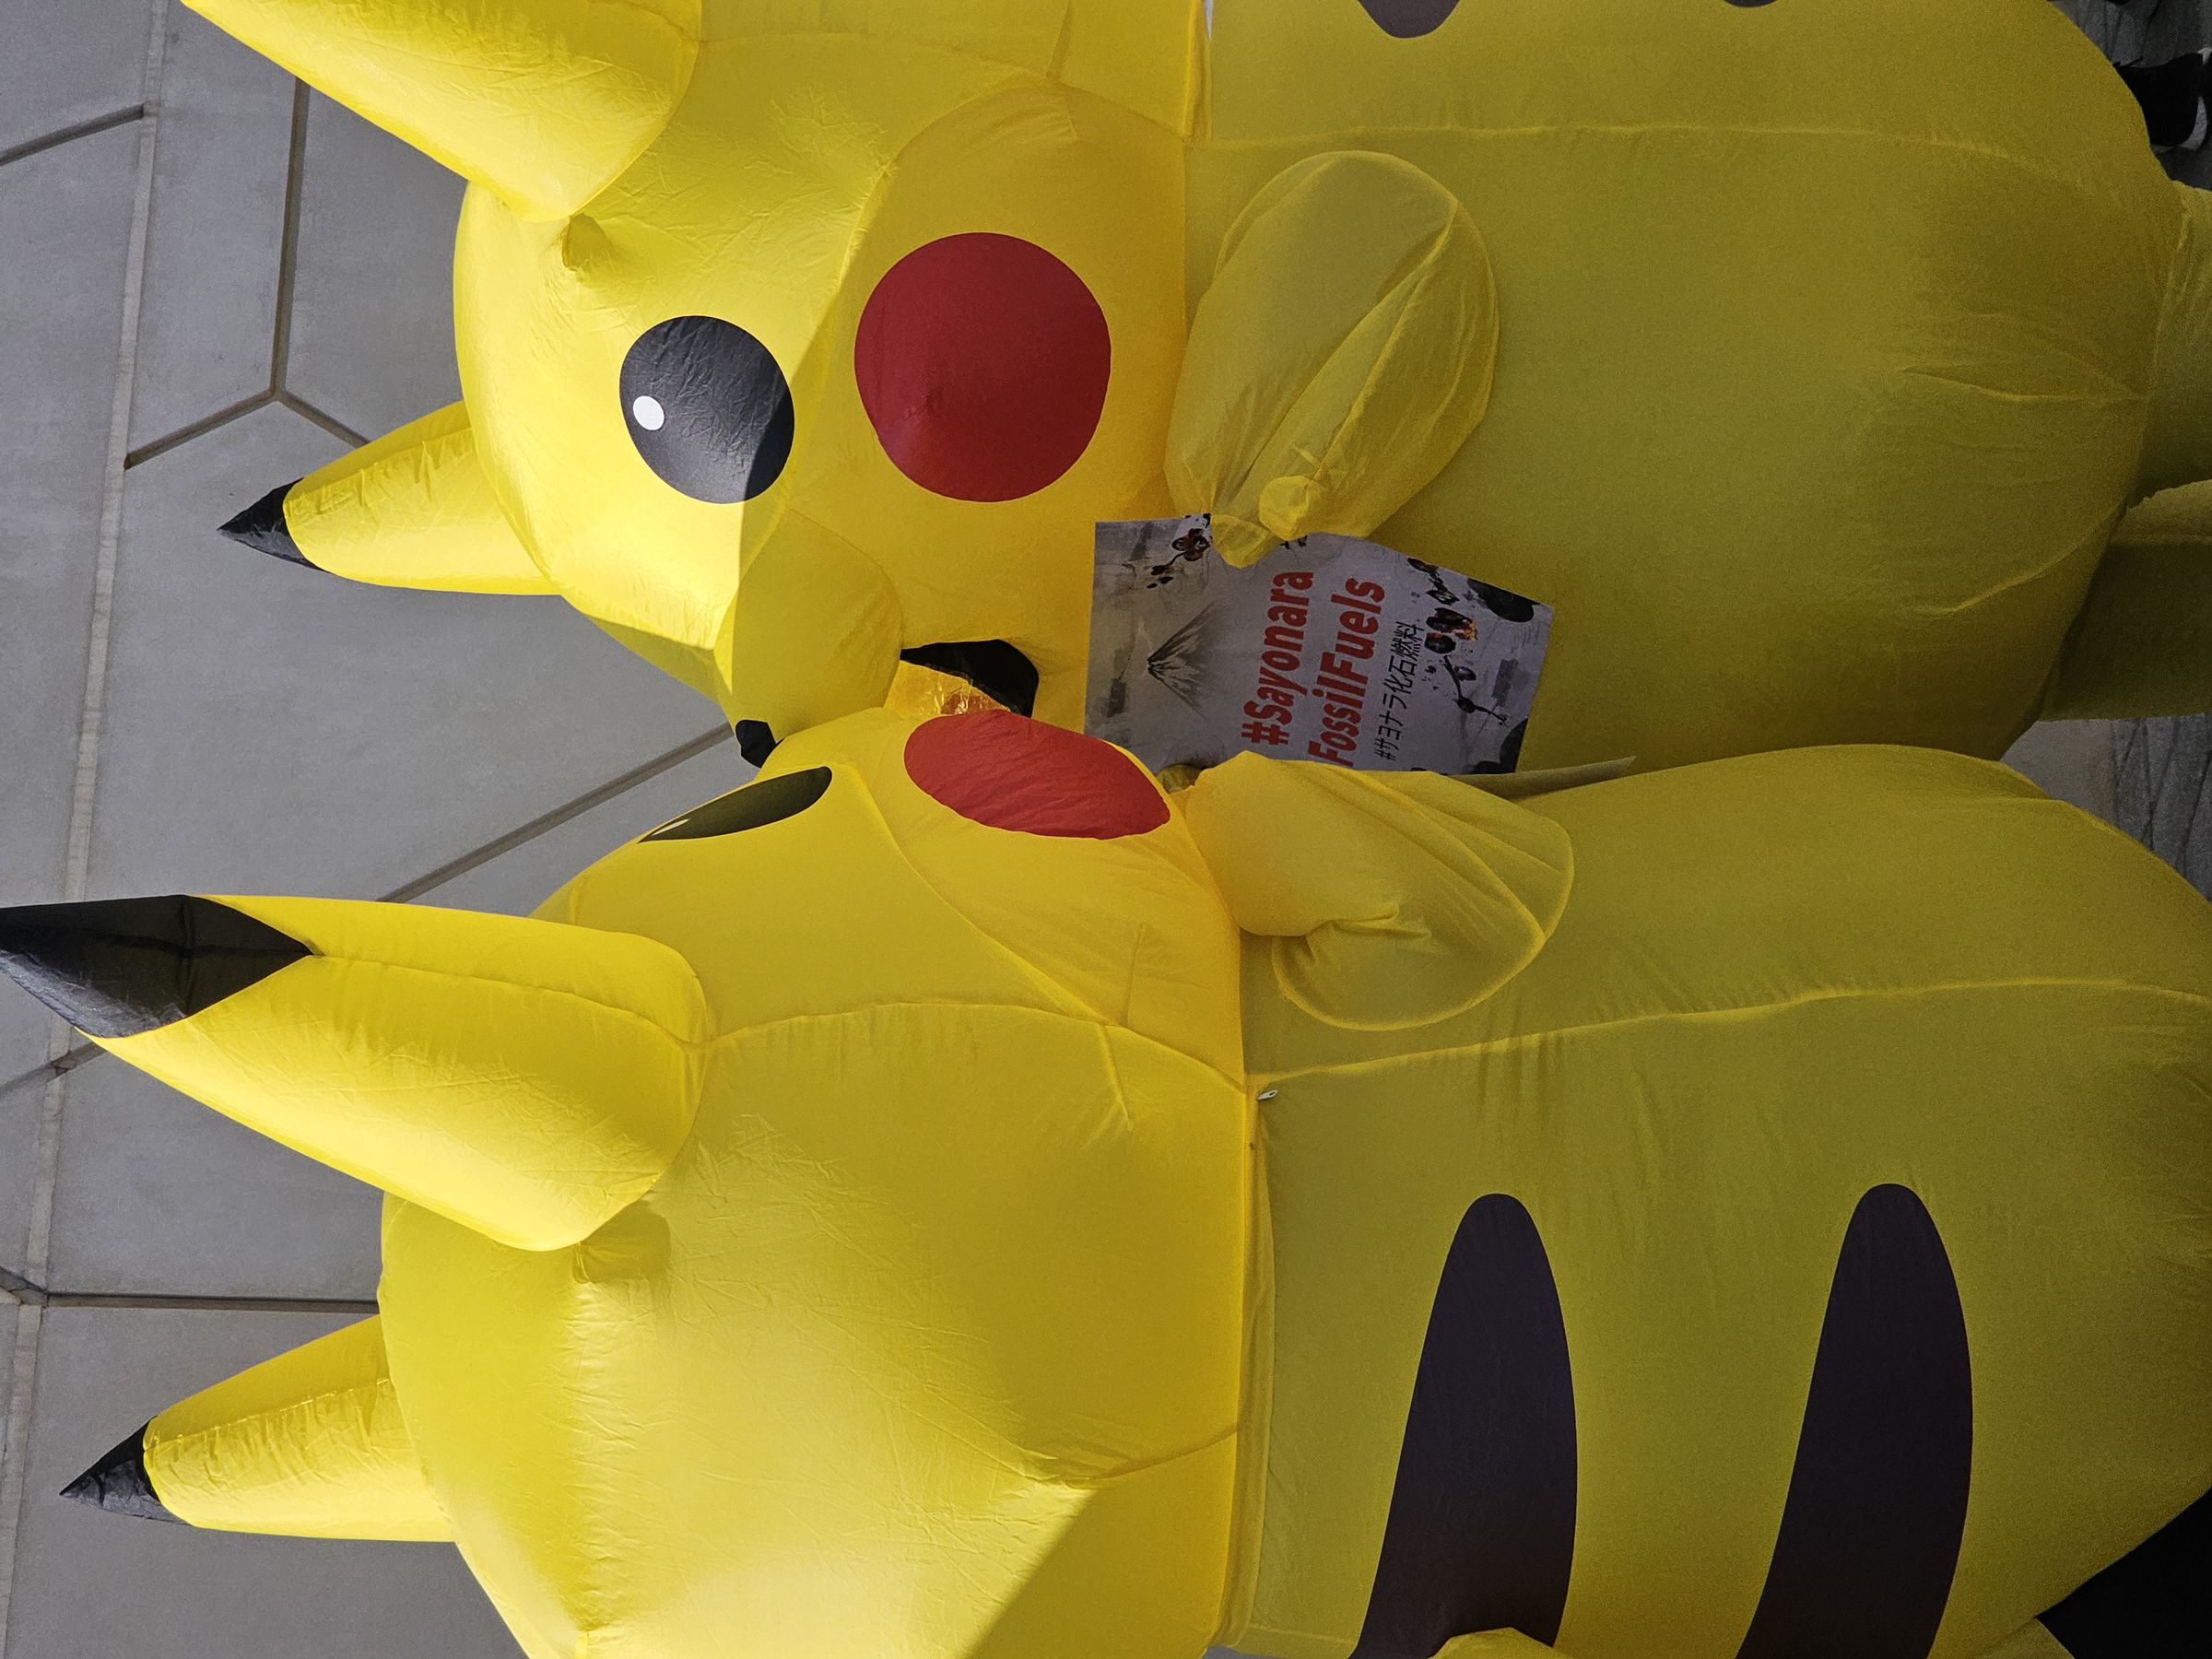 Two people wearing inflatable Pikachu costumes face each other. One holds a sign that says “#Sayonara FossilFuels”.